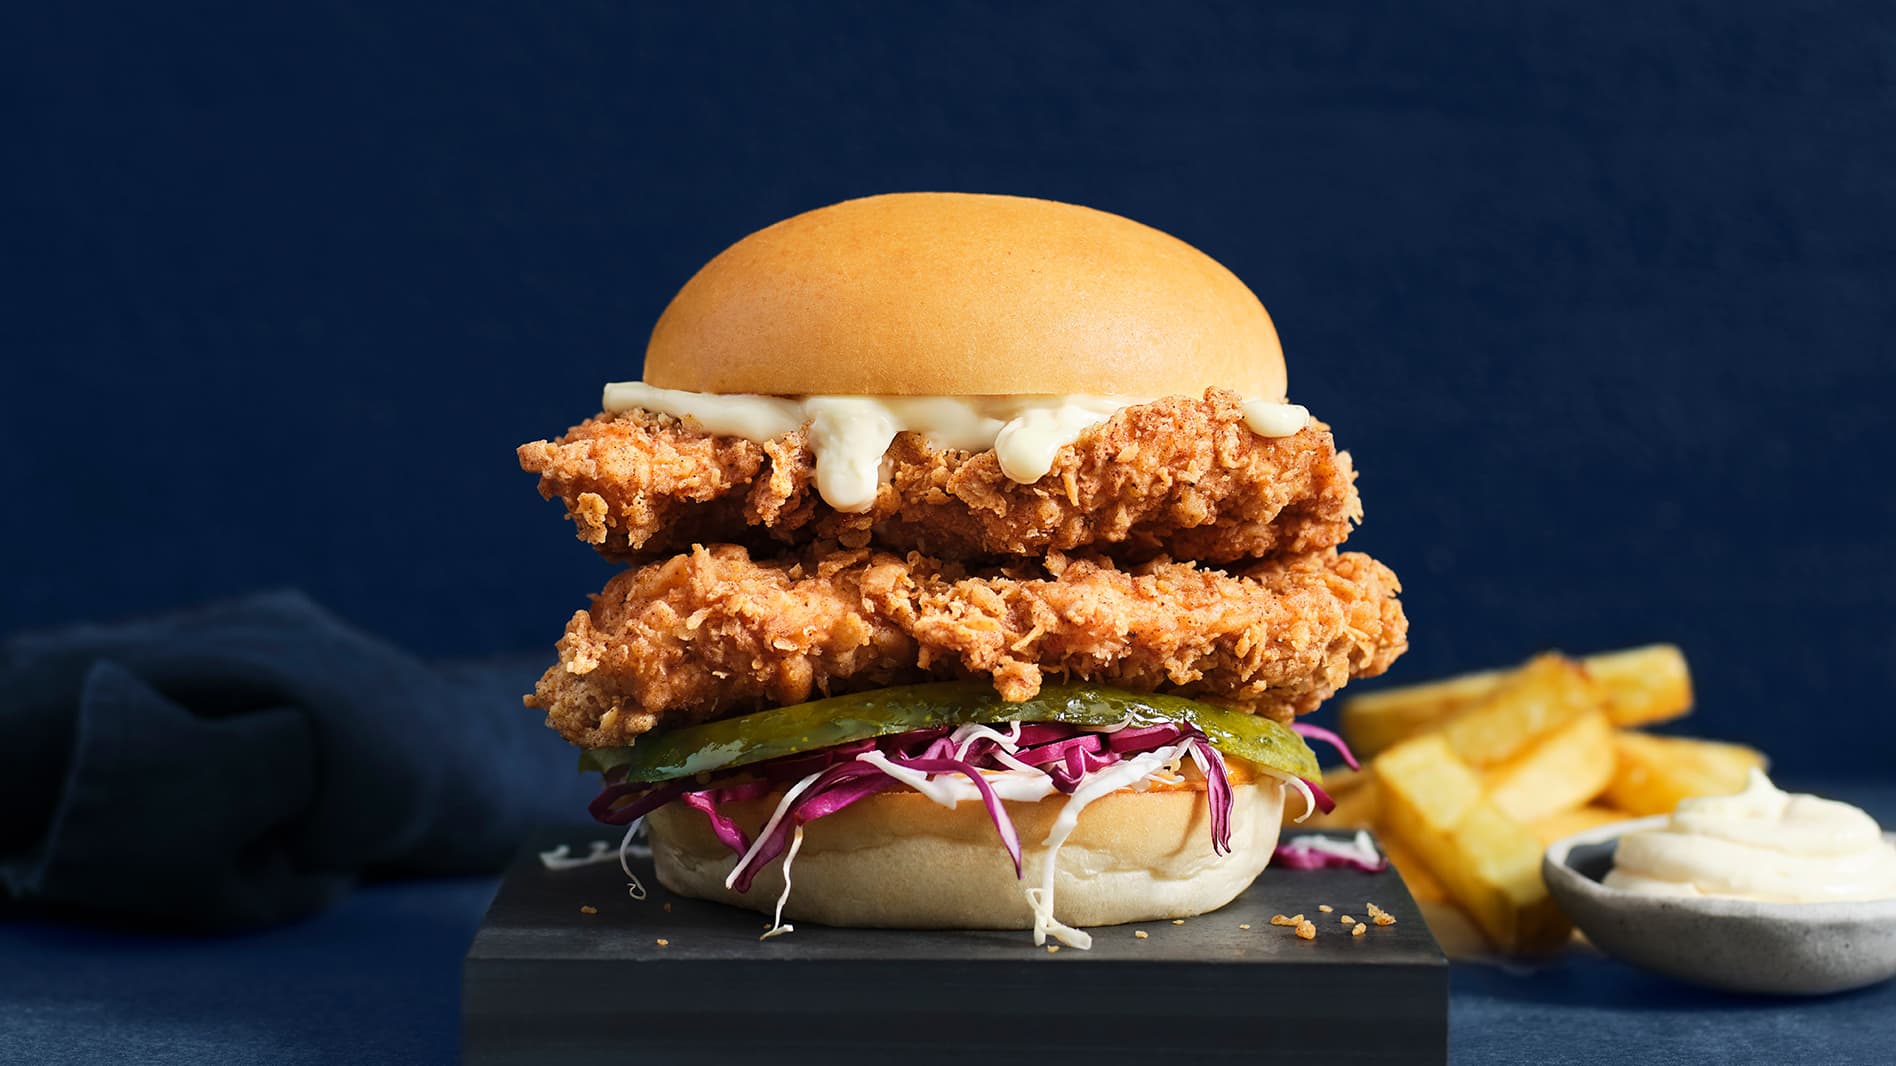 Southern Spiced Chicken Burger, Slaw & Chipotle Mayo